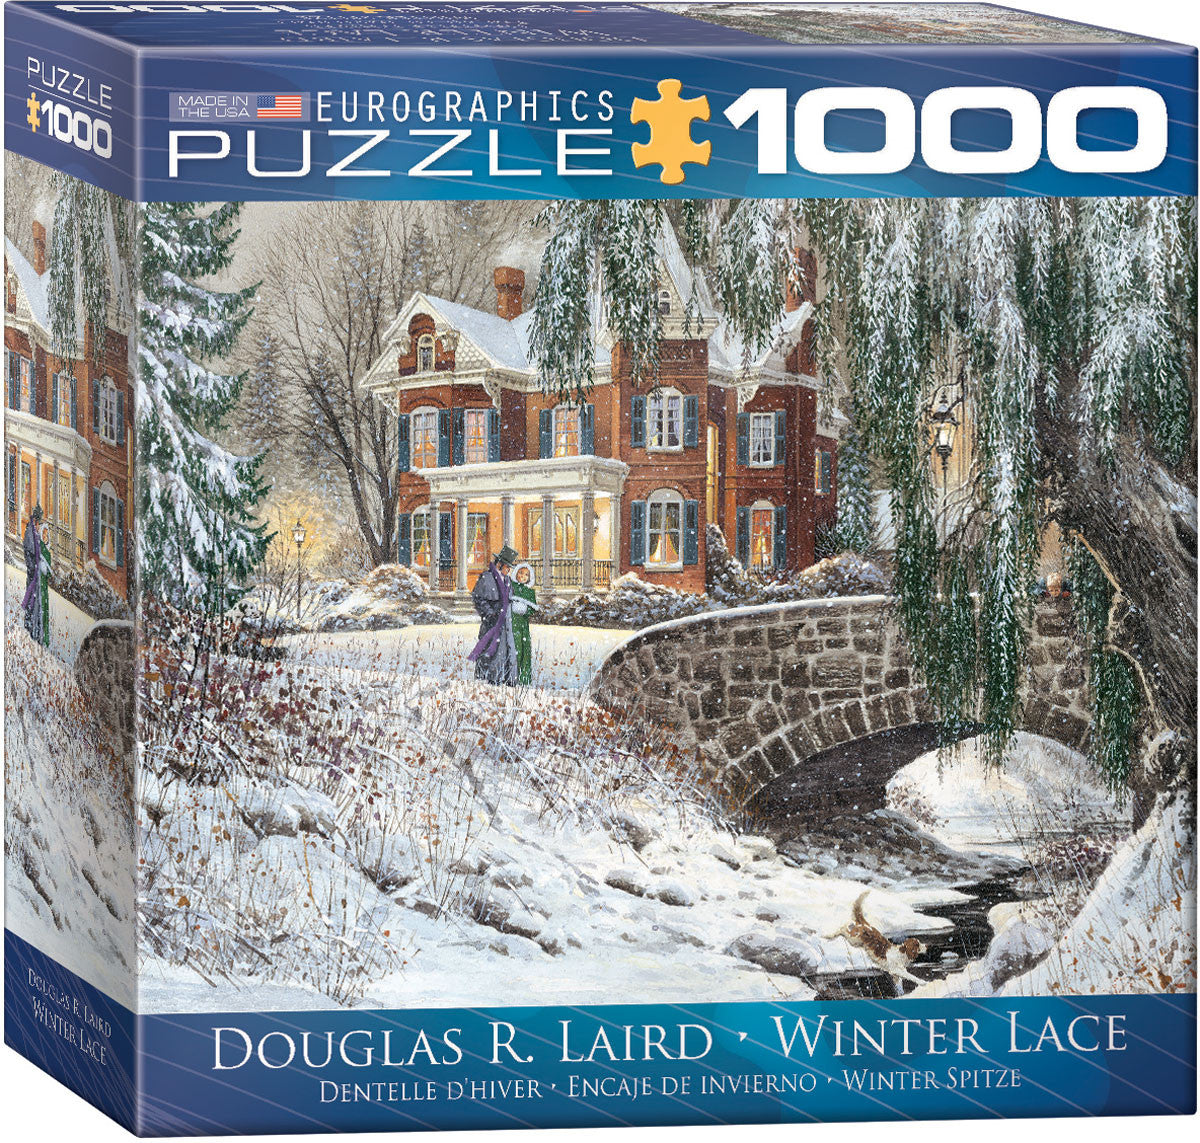 EuroGraphics Puzzles Winter Lace by Douglas R. Laird